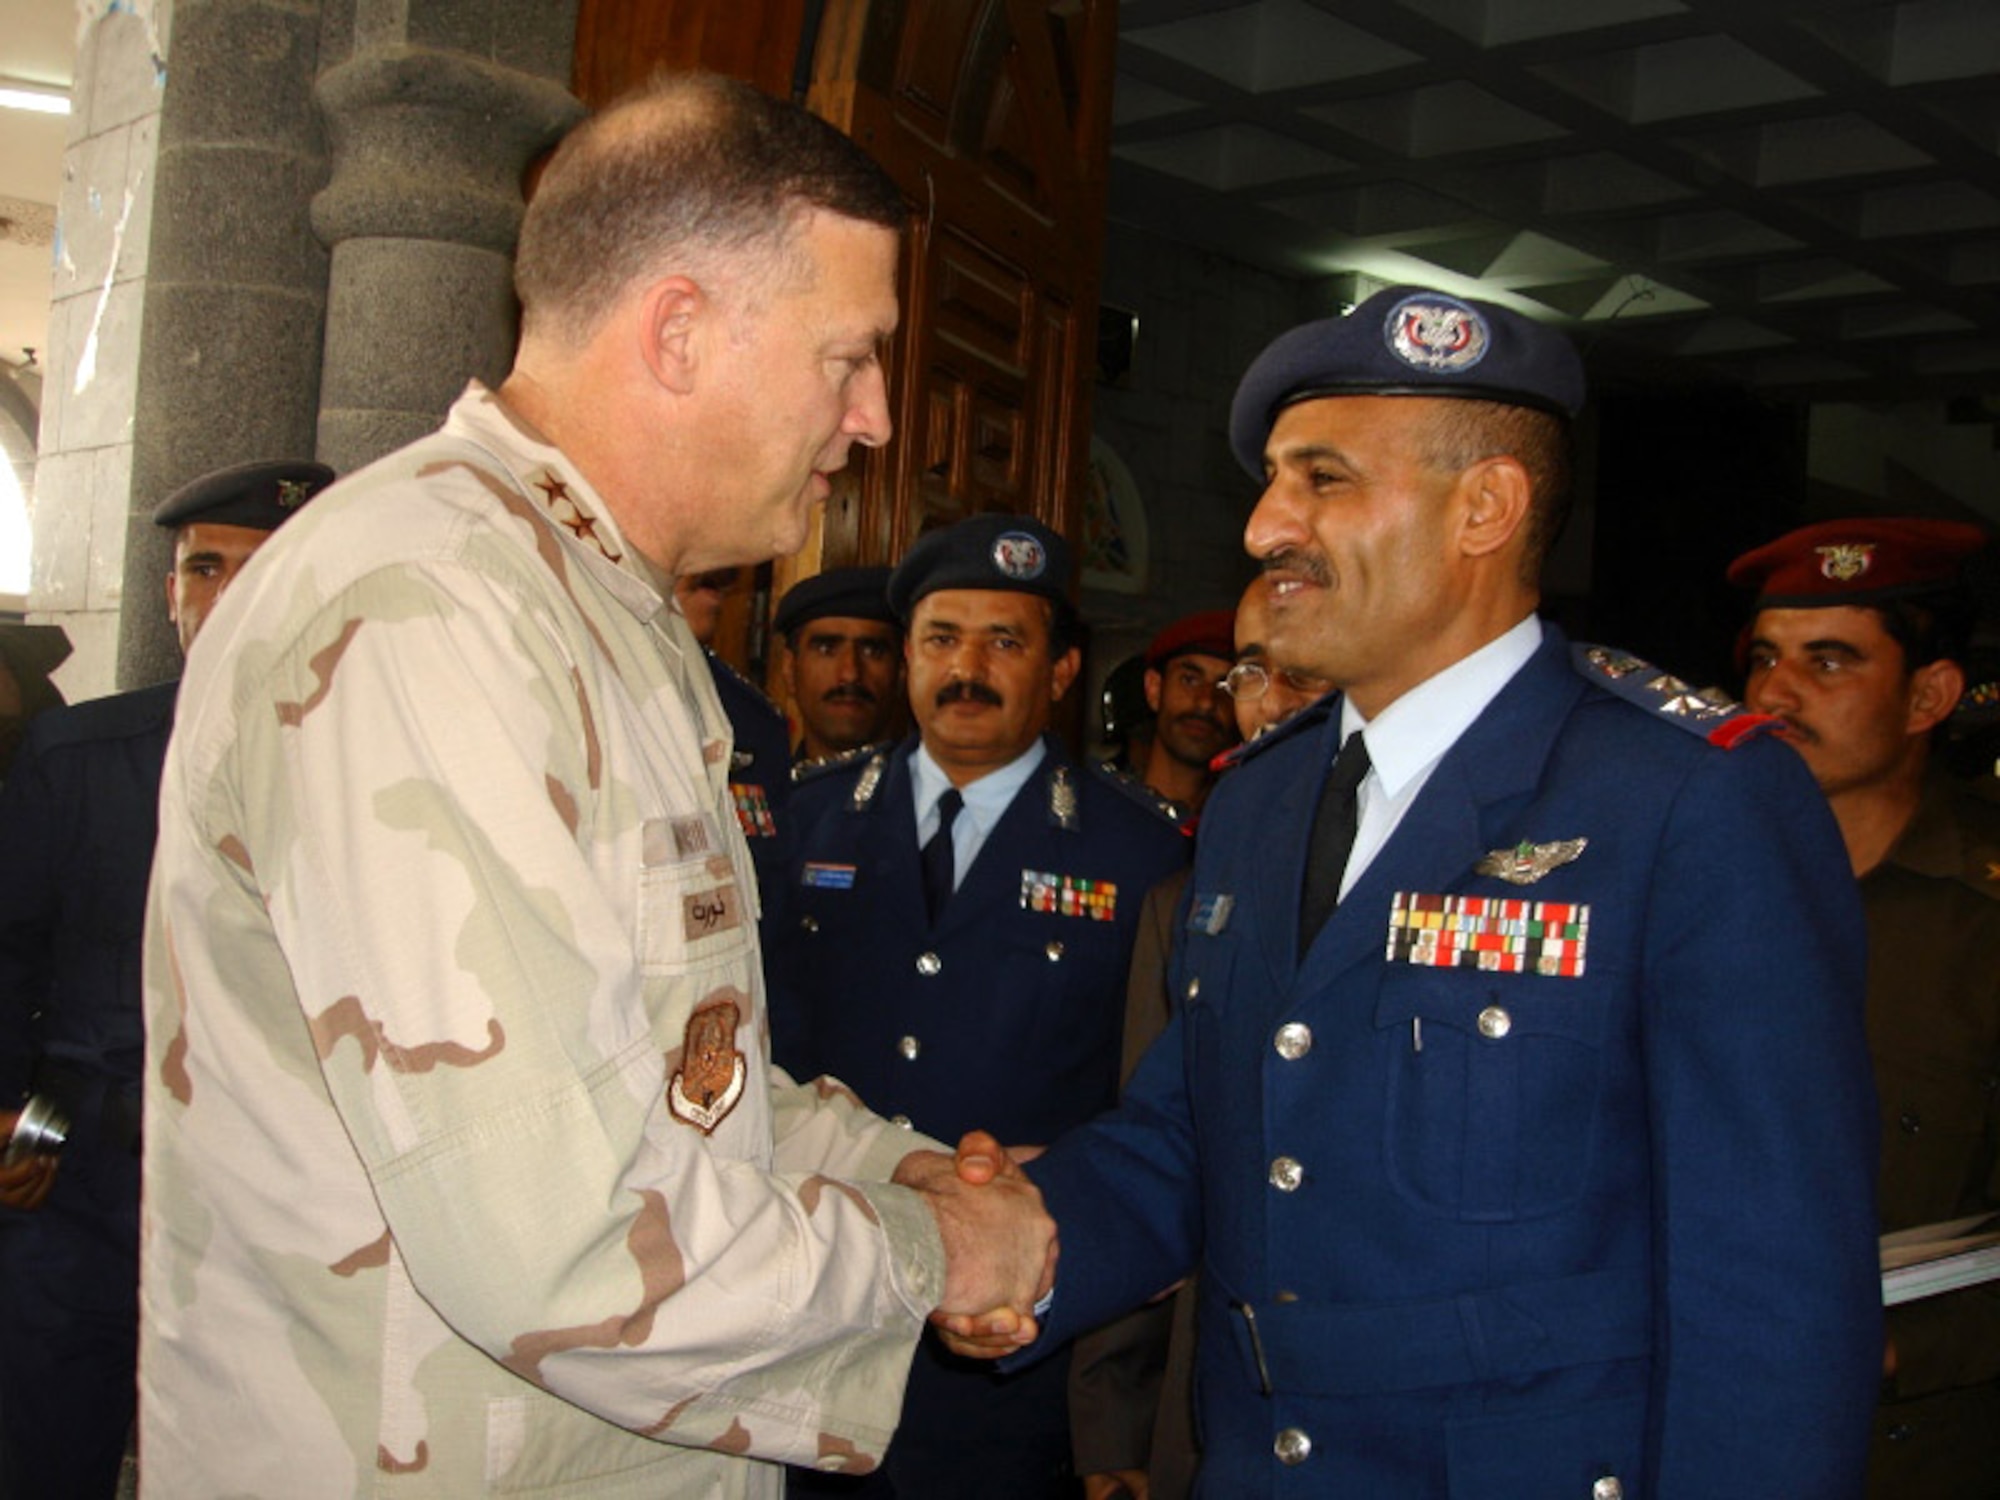 Lt. Gen. Gary L. North says goodbye to Yemeni Brig. Gen. Mohammed Saleh Al-Ahmar as he leaves the Yemeni air force headquarters Feb. 7 in Yemen. General North is the commander of U.S. Central Command Air Forces and met with senior Yemini air force officials and the U.S. ambassador to Yemen. (U.S. State Department photo/Ann Marie Roubachewsky) 
